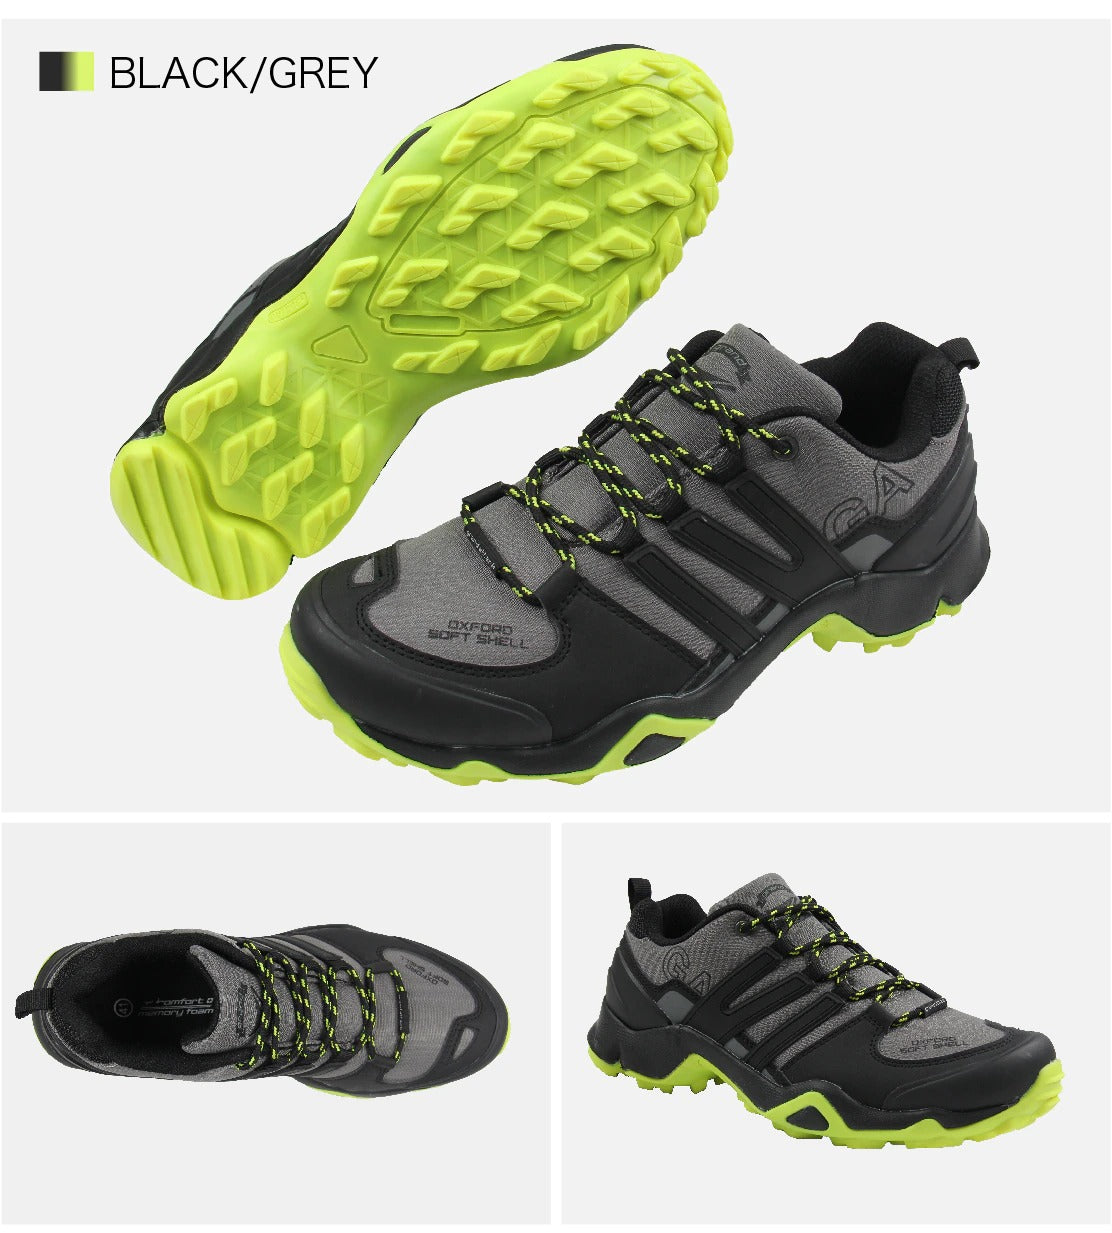 Grand Attack Walking Hiking Trekking Backpacking Shoes Trainers